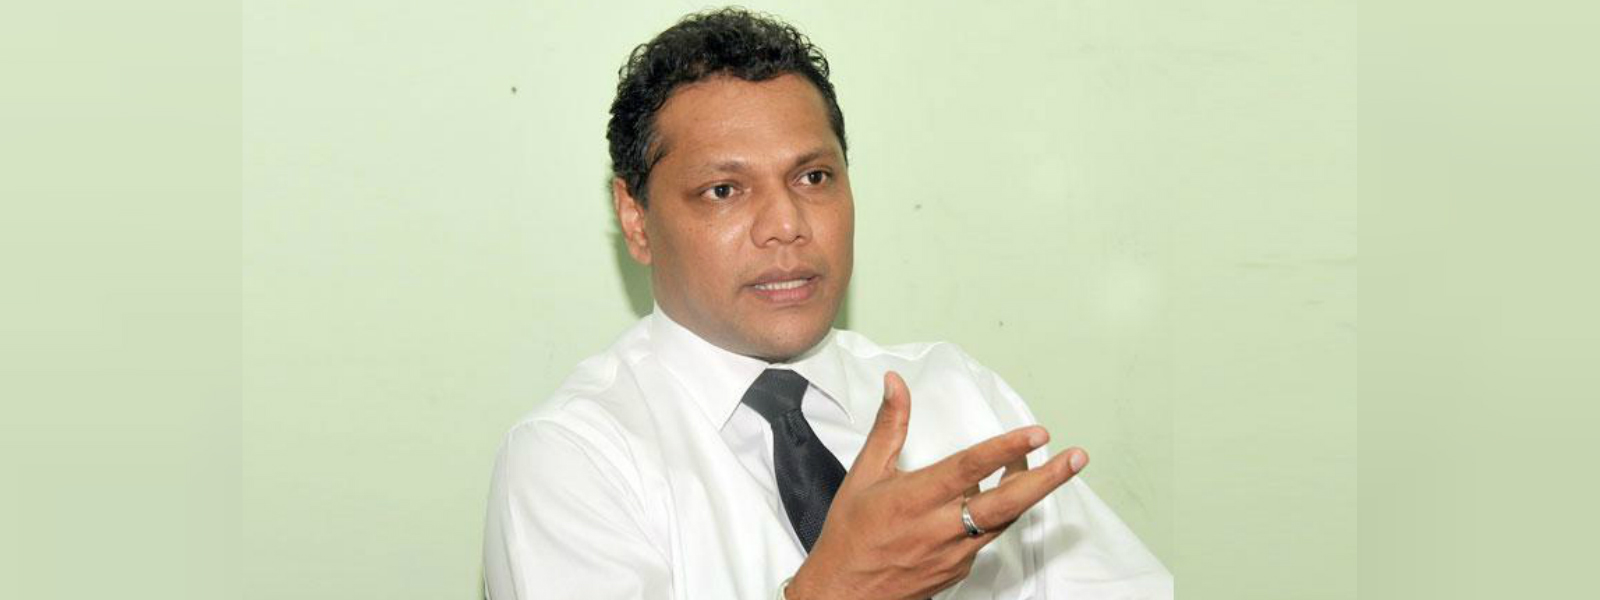 5 former SLFP ministers face displinary inquiries